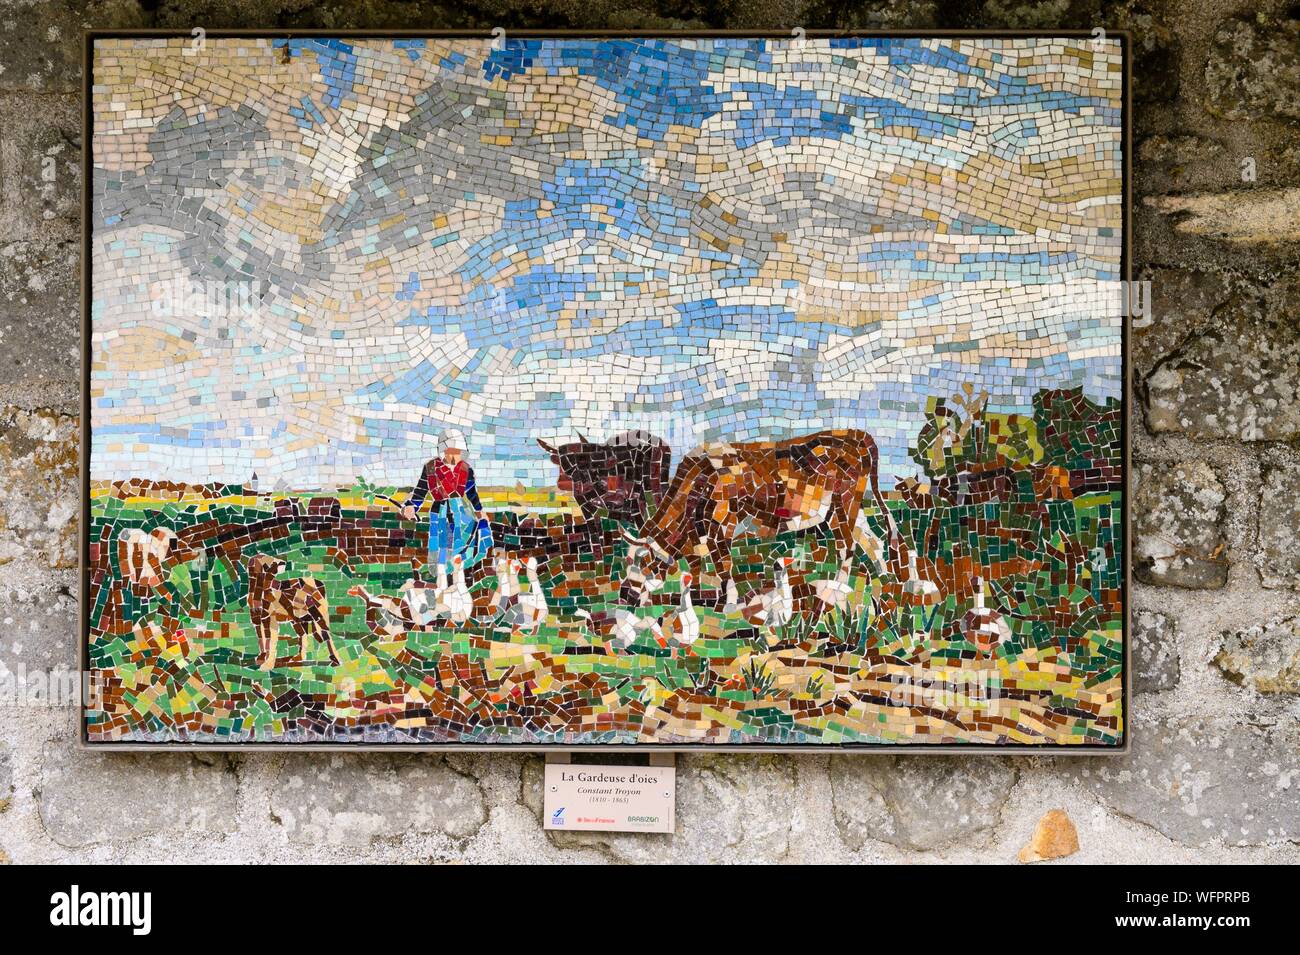 France, Seine-et-Marne, Barbizon, natural regional park of Gâtinais, reproduction of the painting la gardeuse d'oies of Constant Troyon on a wall of the city Stock Photo